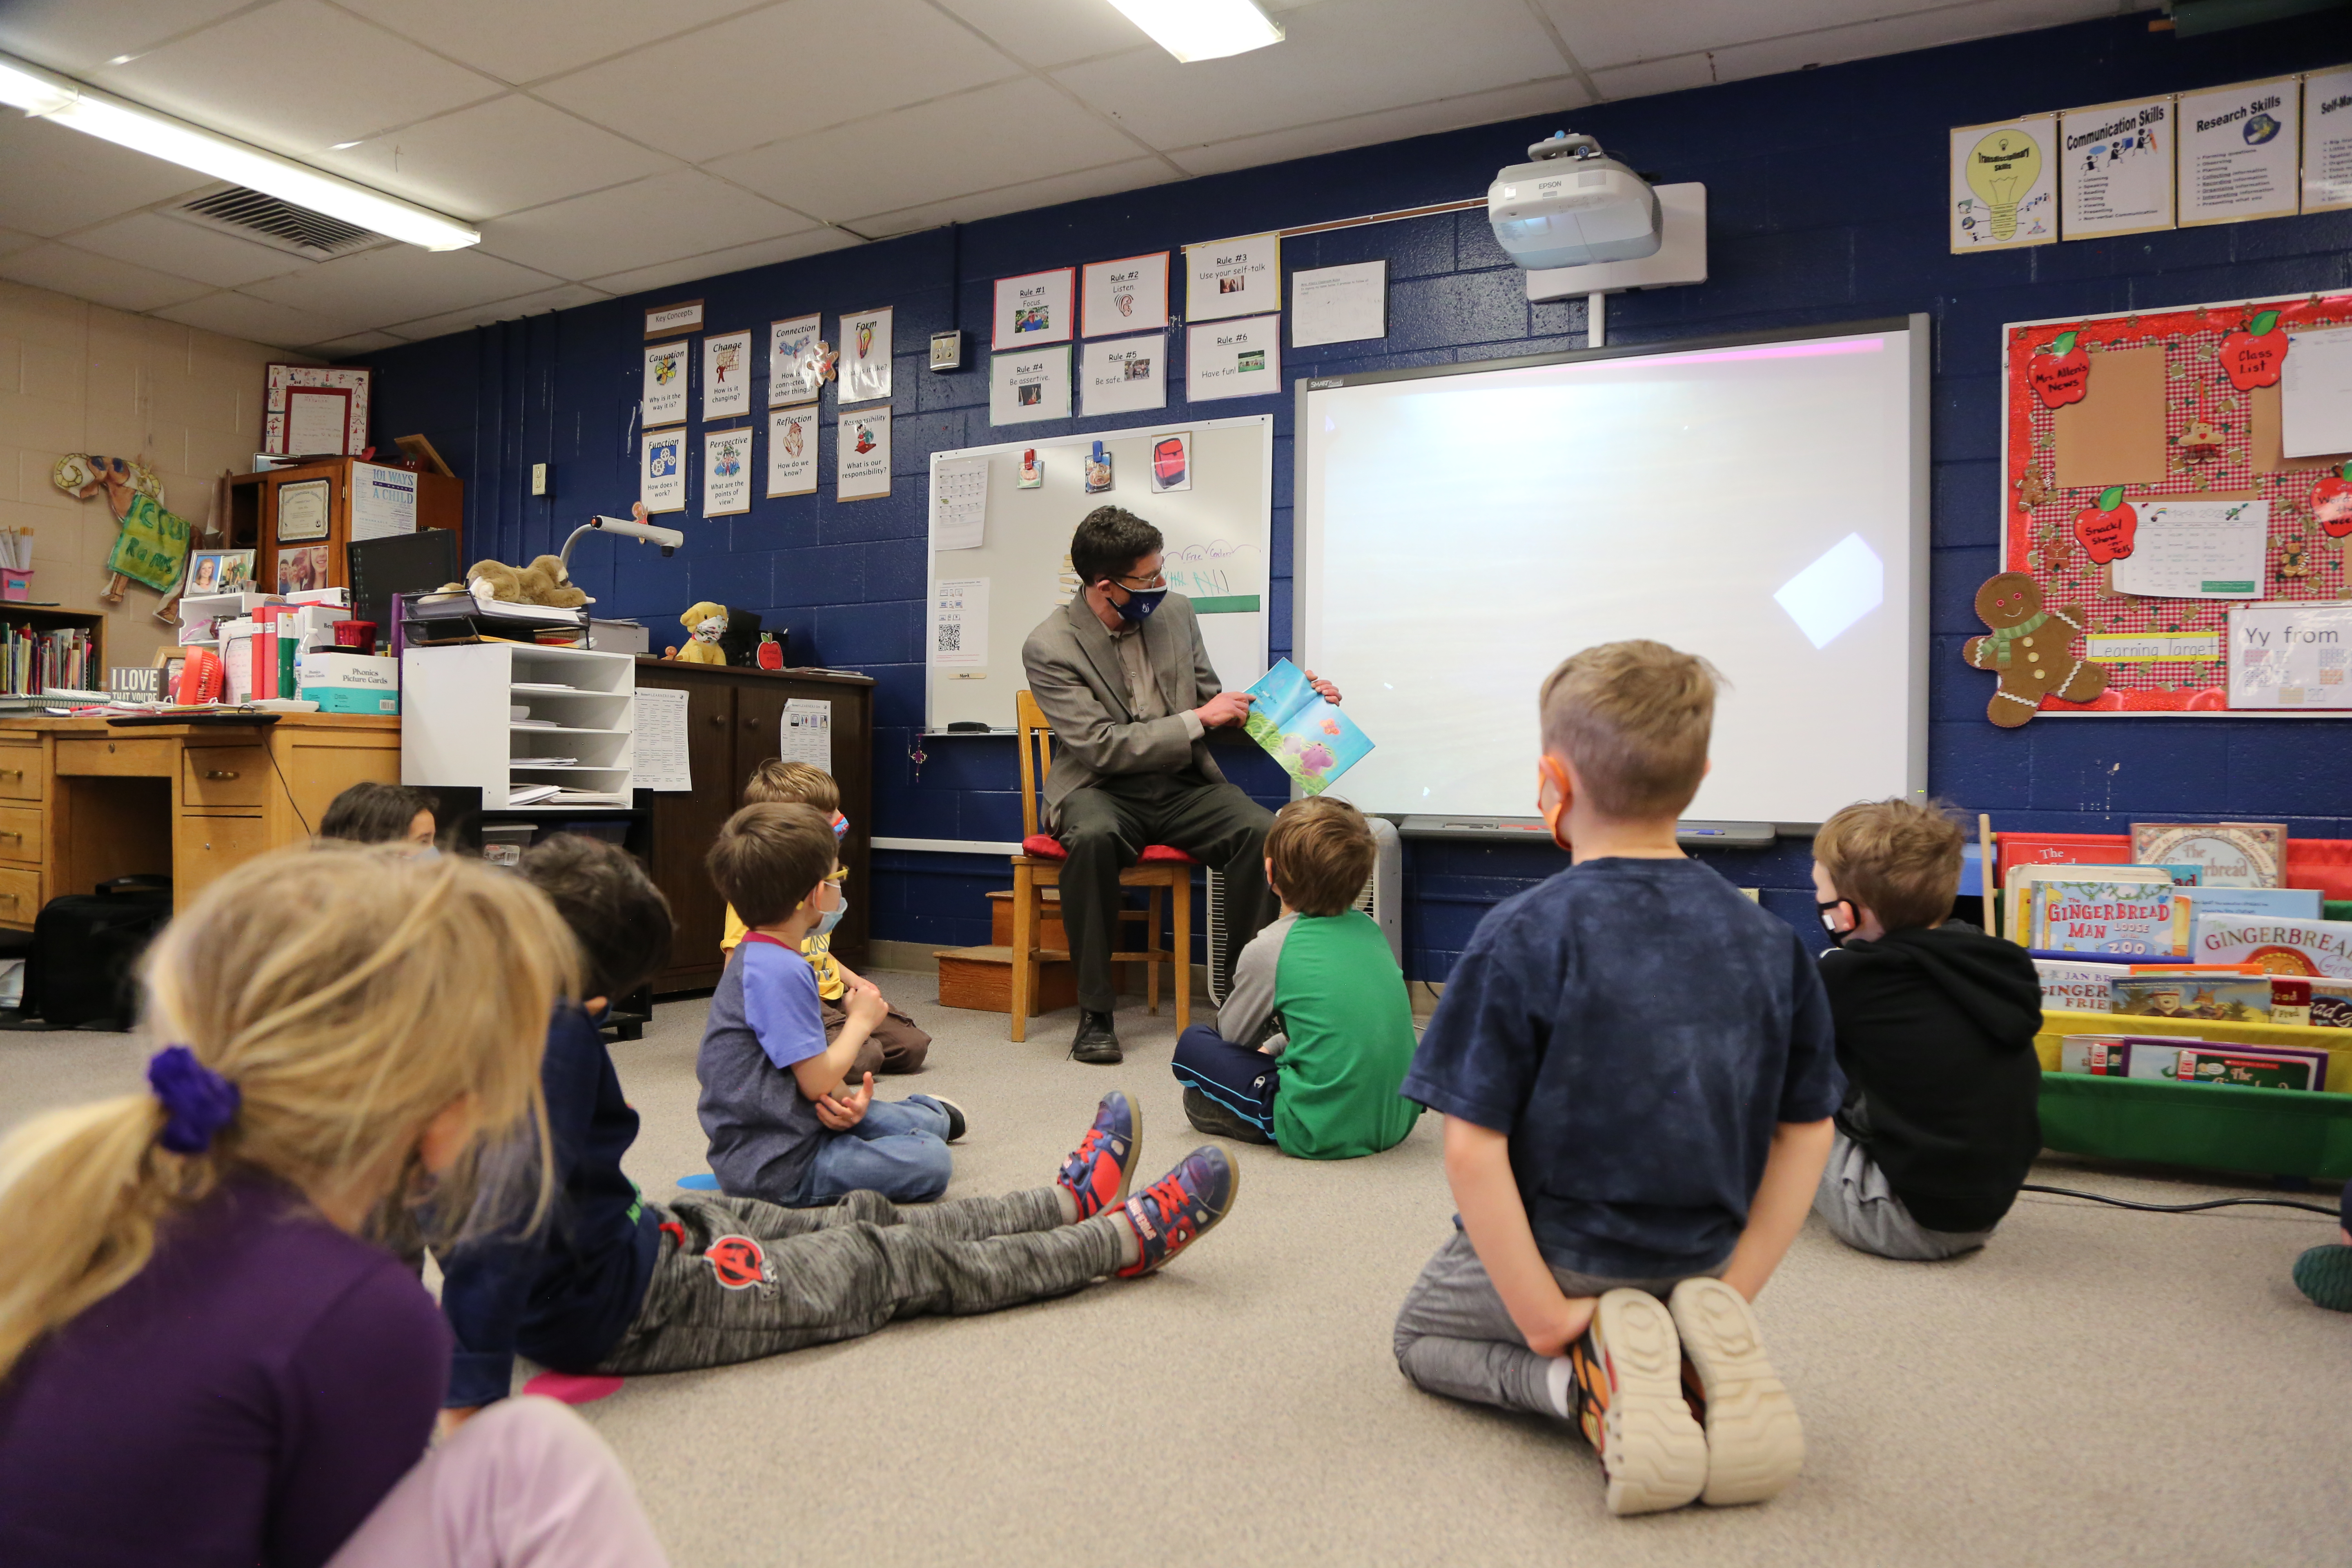 Christophe Febvre reads to elementary students in a classroom.